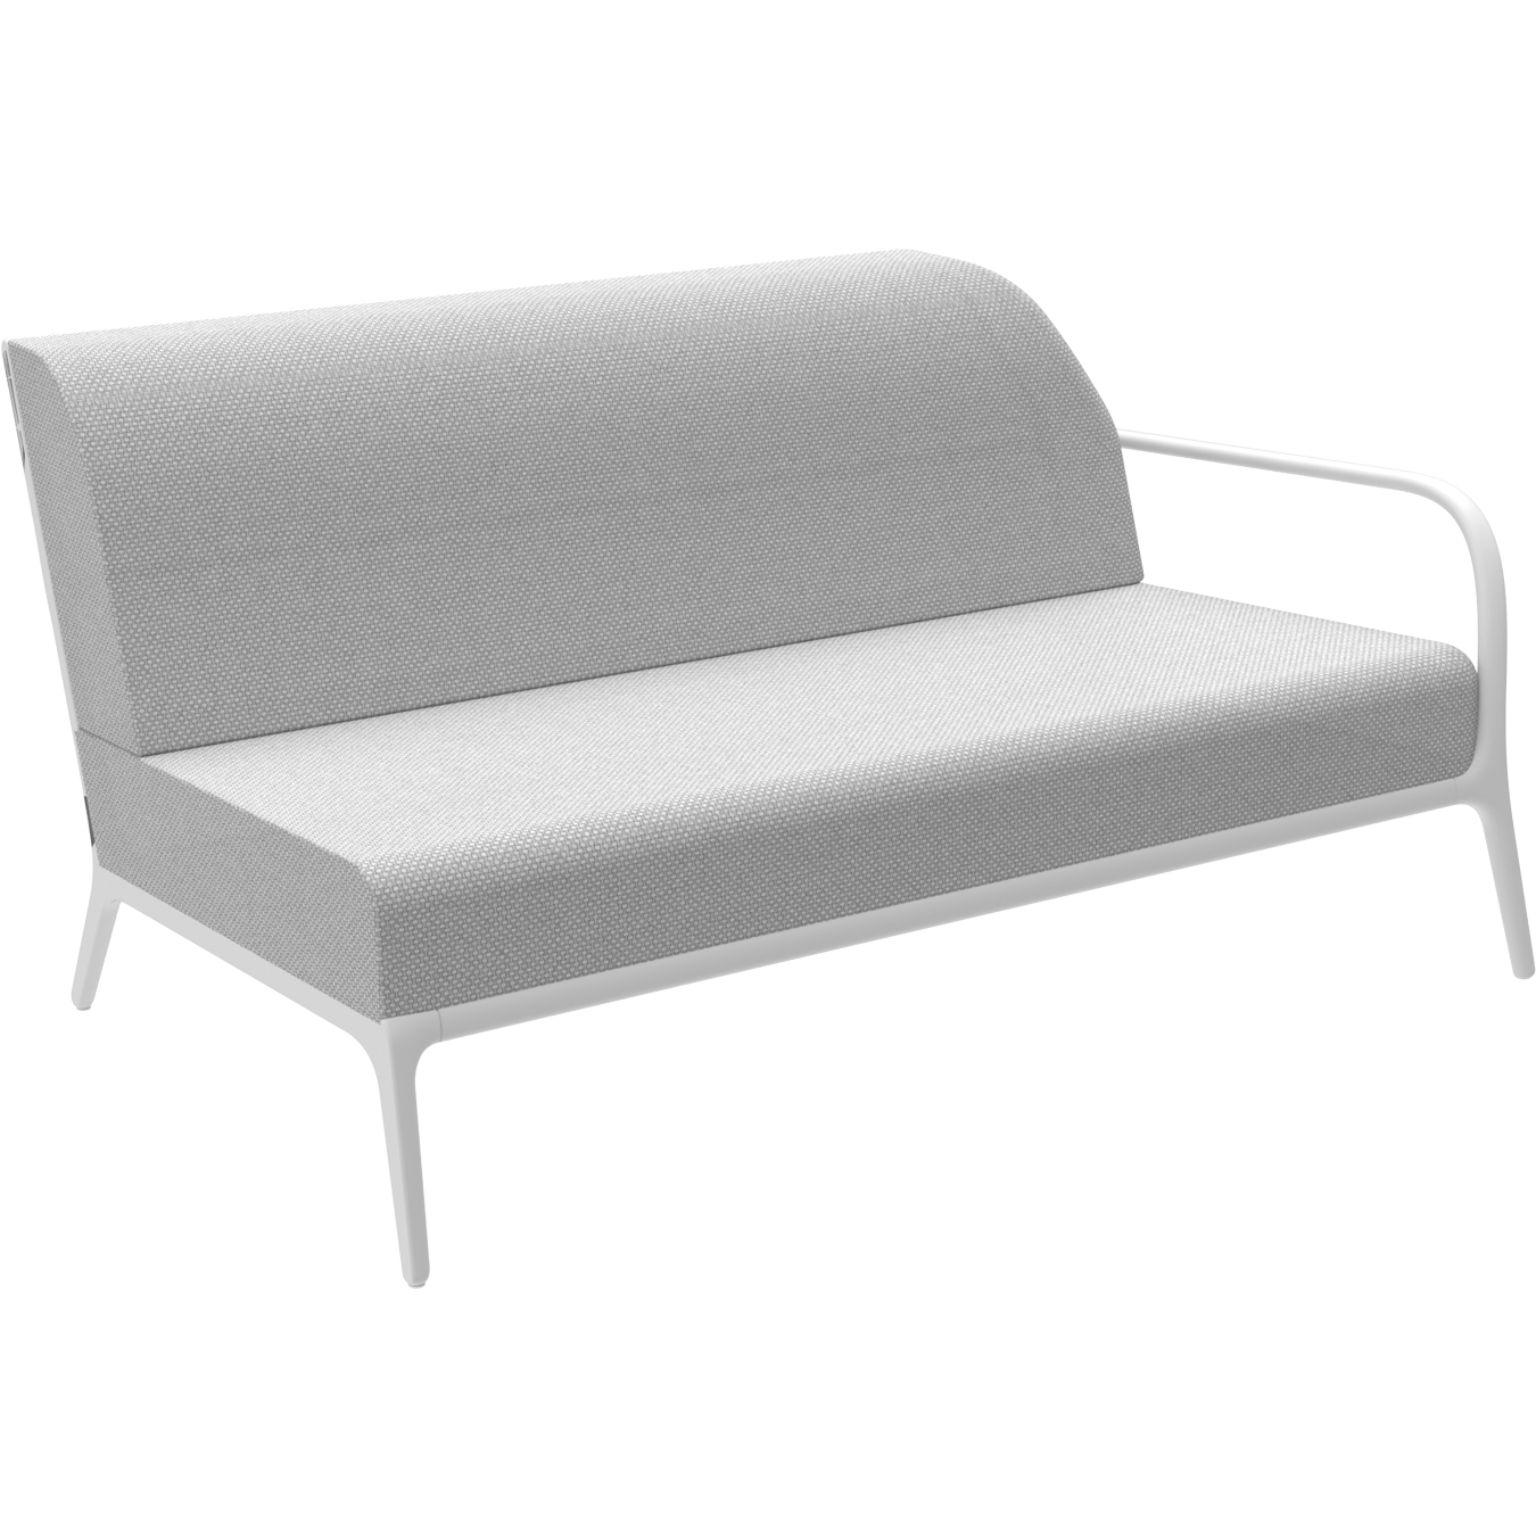 Xaloc Left 160 white modular sofa by MOWEE
Dimensions: D100 x W160 x H81 cm (Seat Height 42cm)
Material: Aluminium, Textile
Weight: 37 kg
Also Available in different colors and finishes. 

 Xaloc synthesizes the lines of interior furniture to